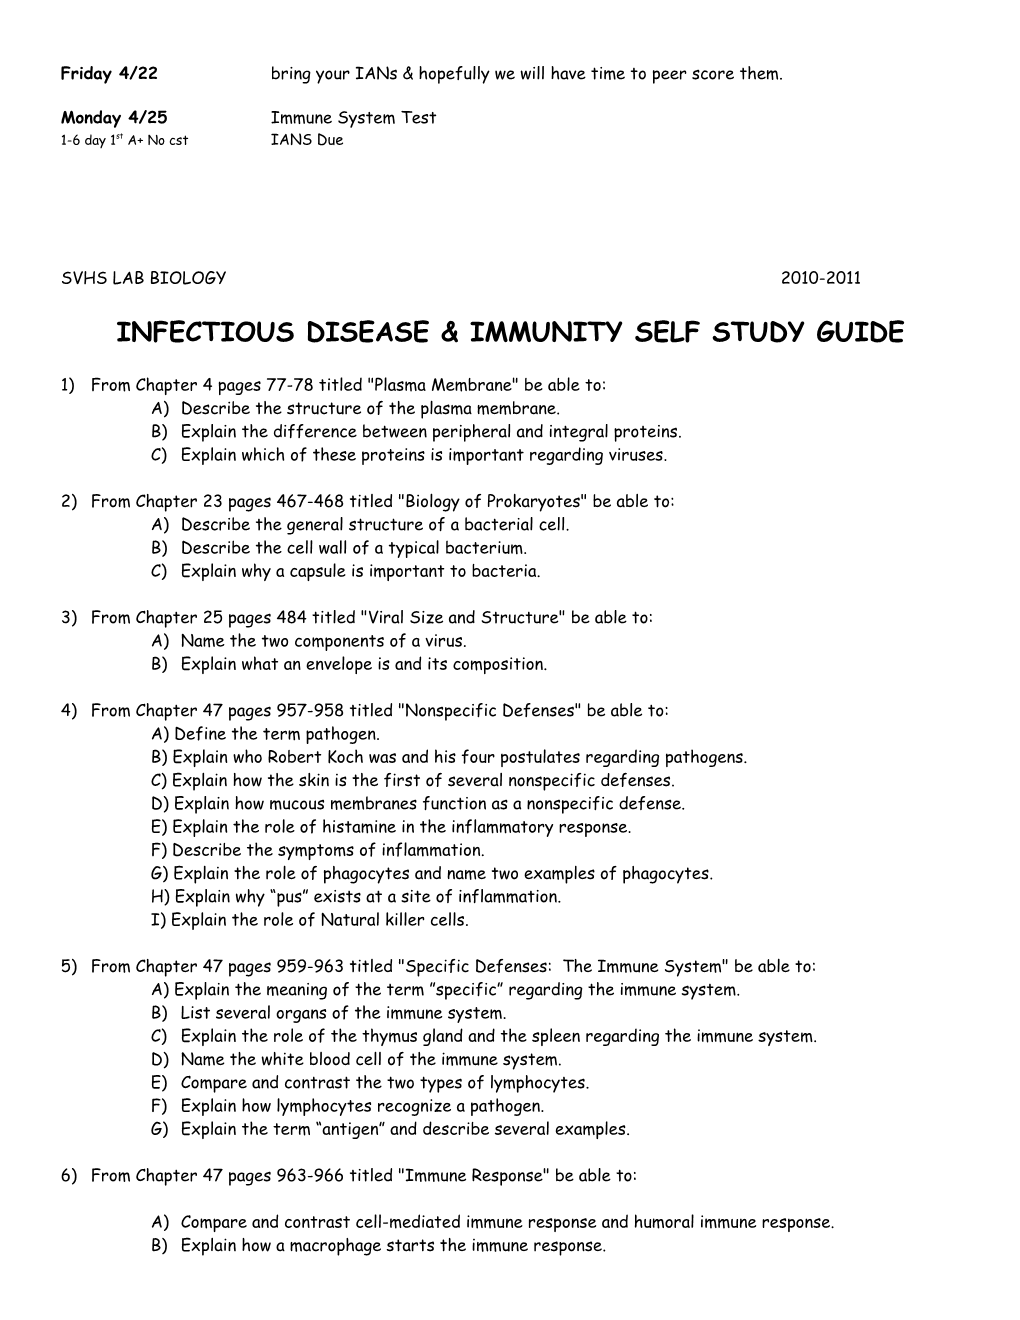 Infectious Disease and Immunity Study Guide